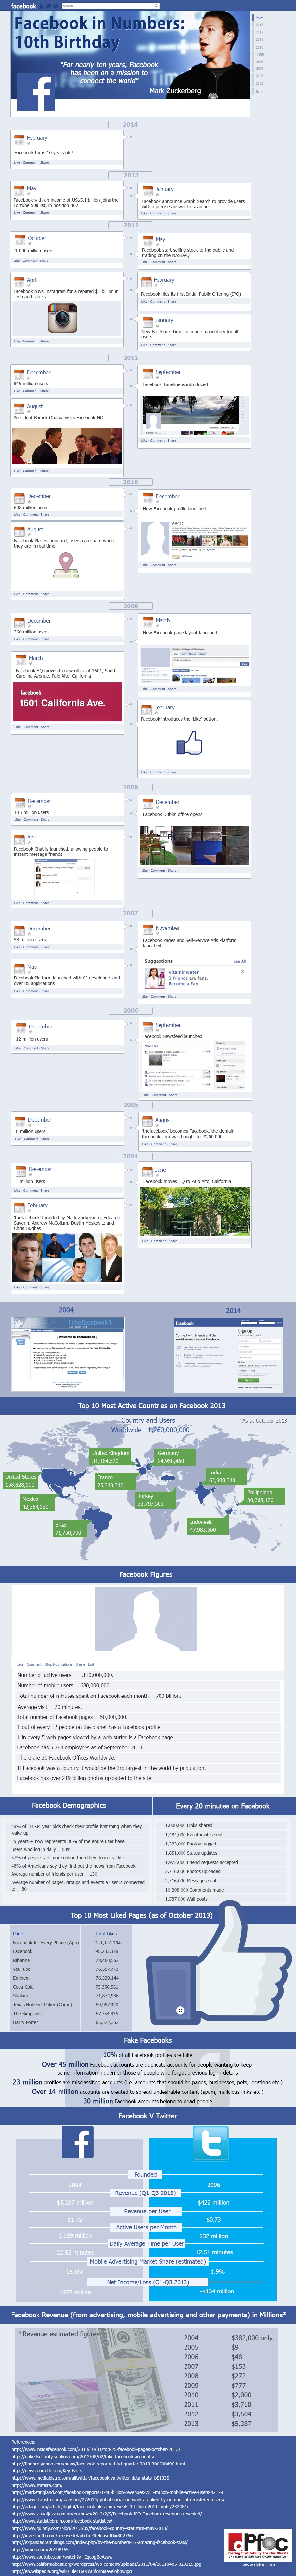 facebook-infographic_updated